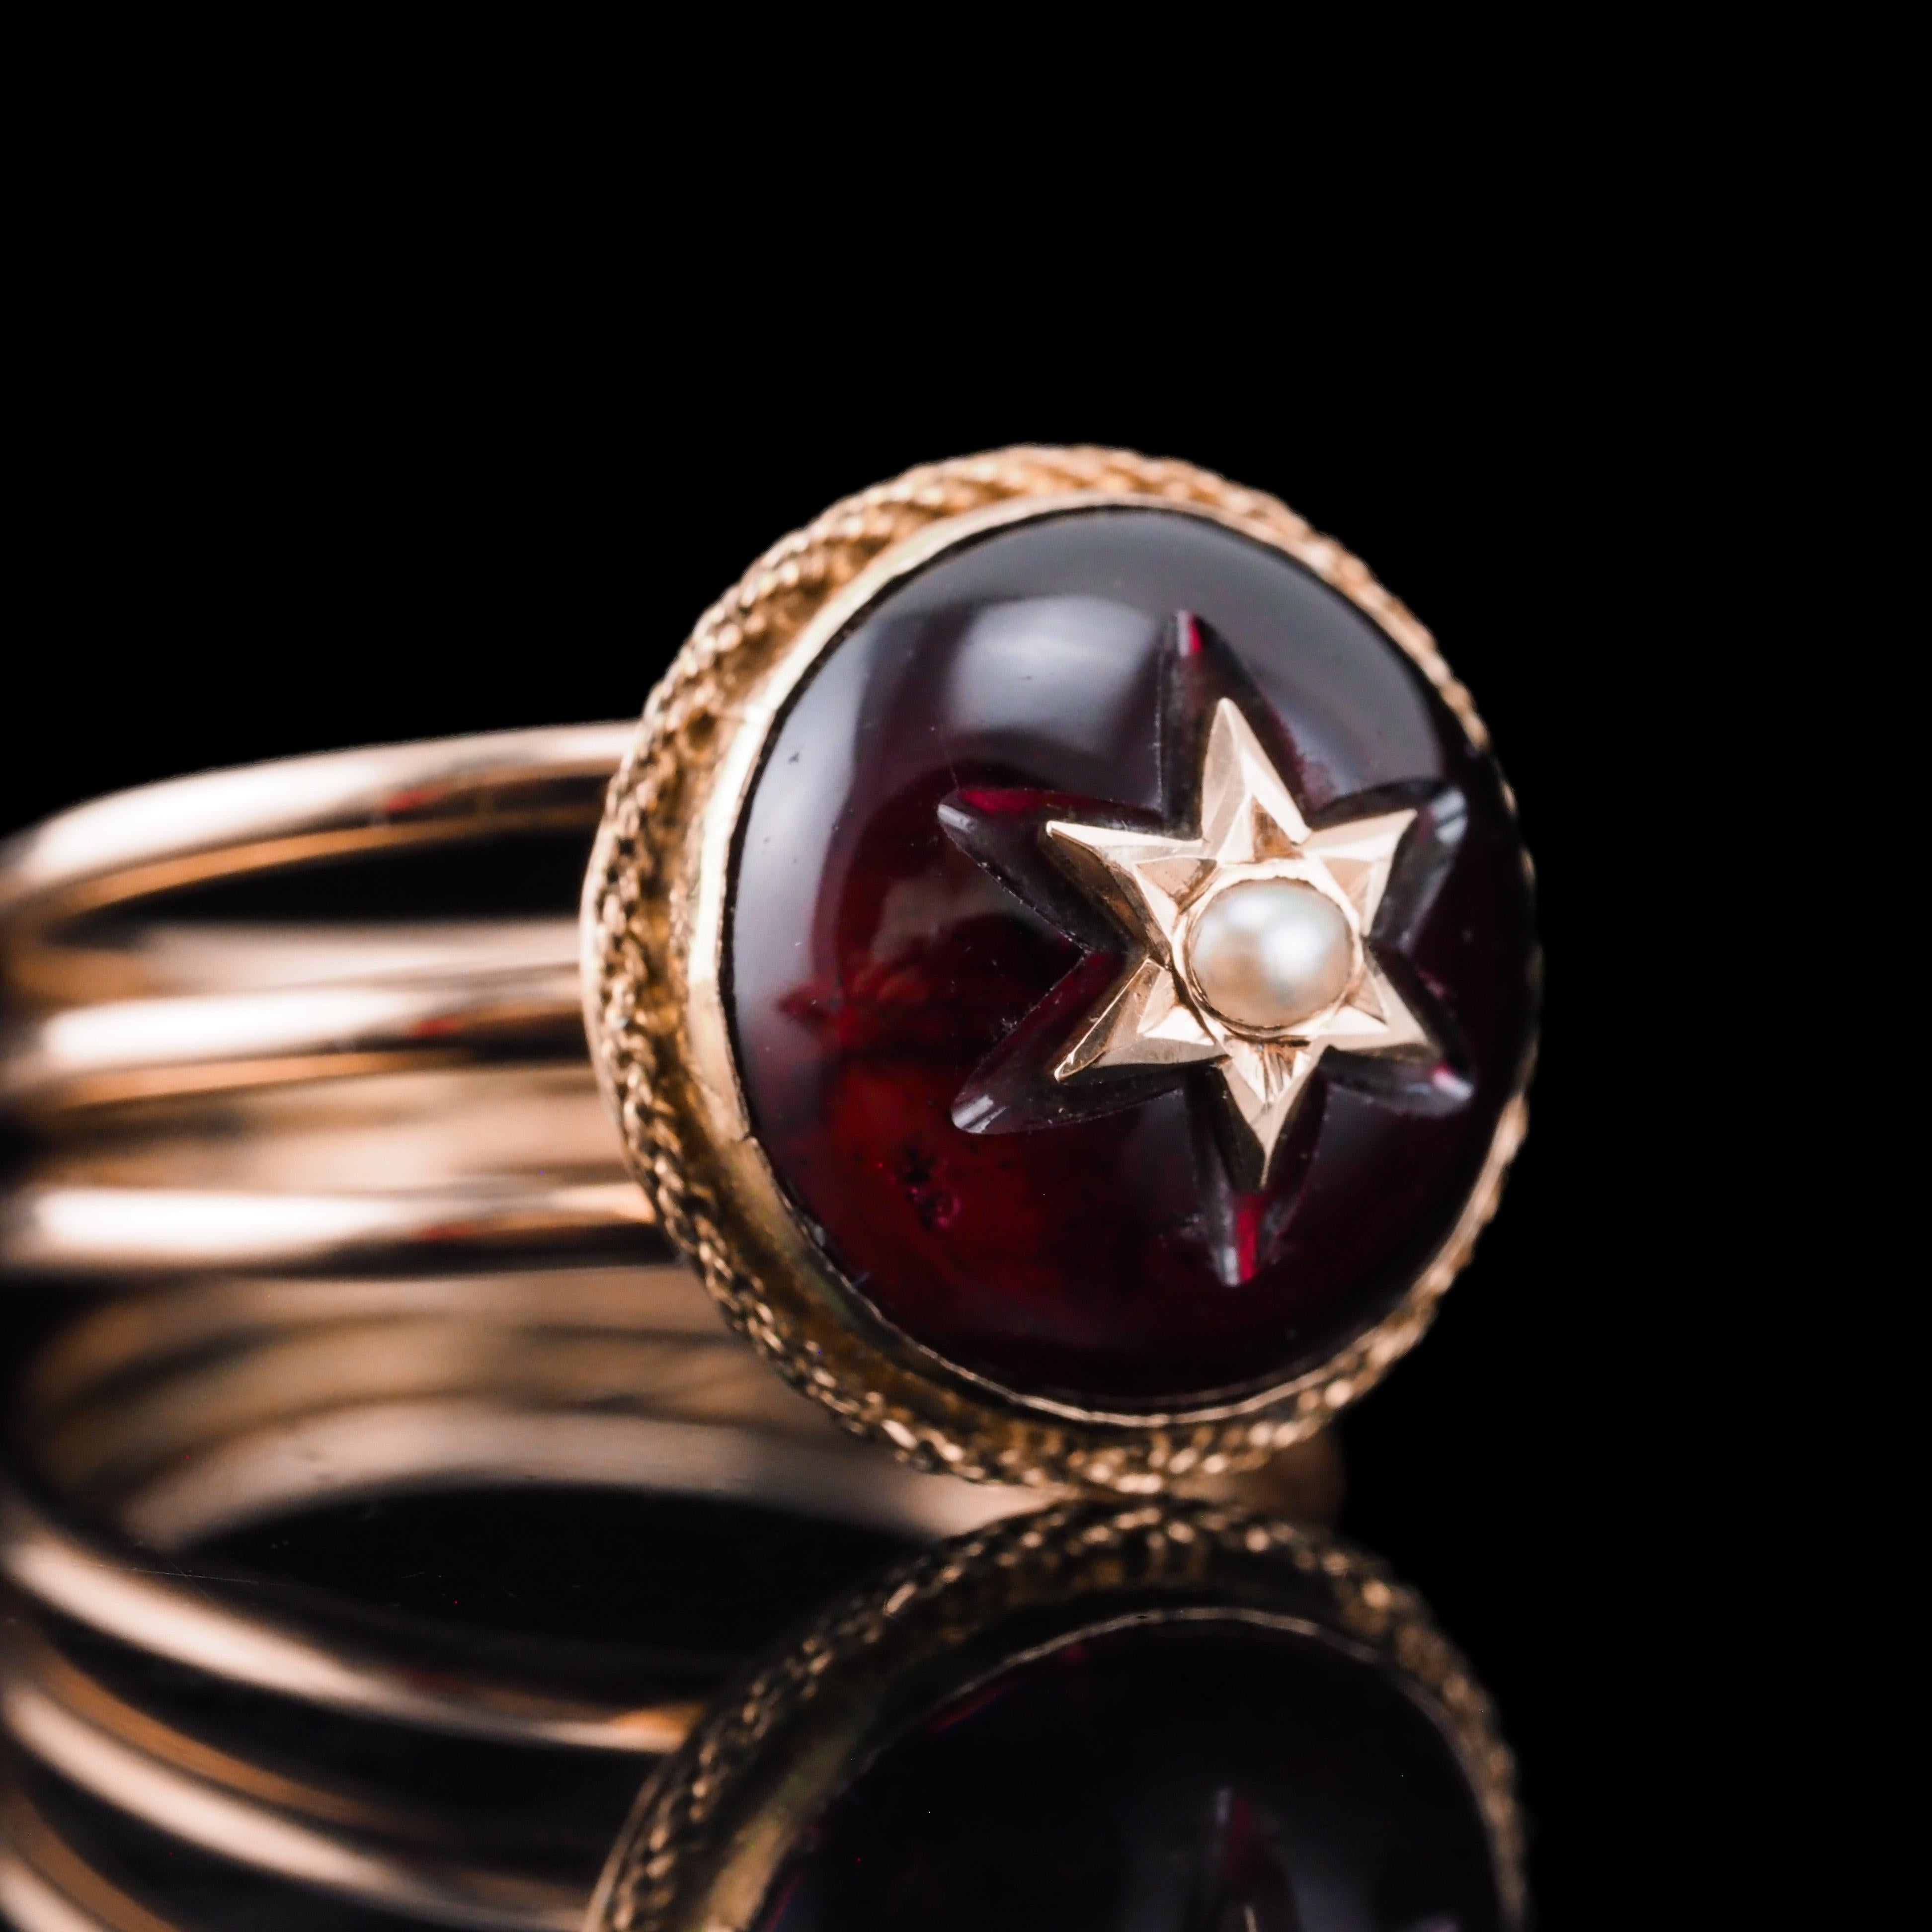 Antique Victorian 14K Gold Garnet Star Cabochon Ring with Seed Pearl - c.1880 For Sale 4